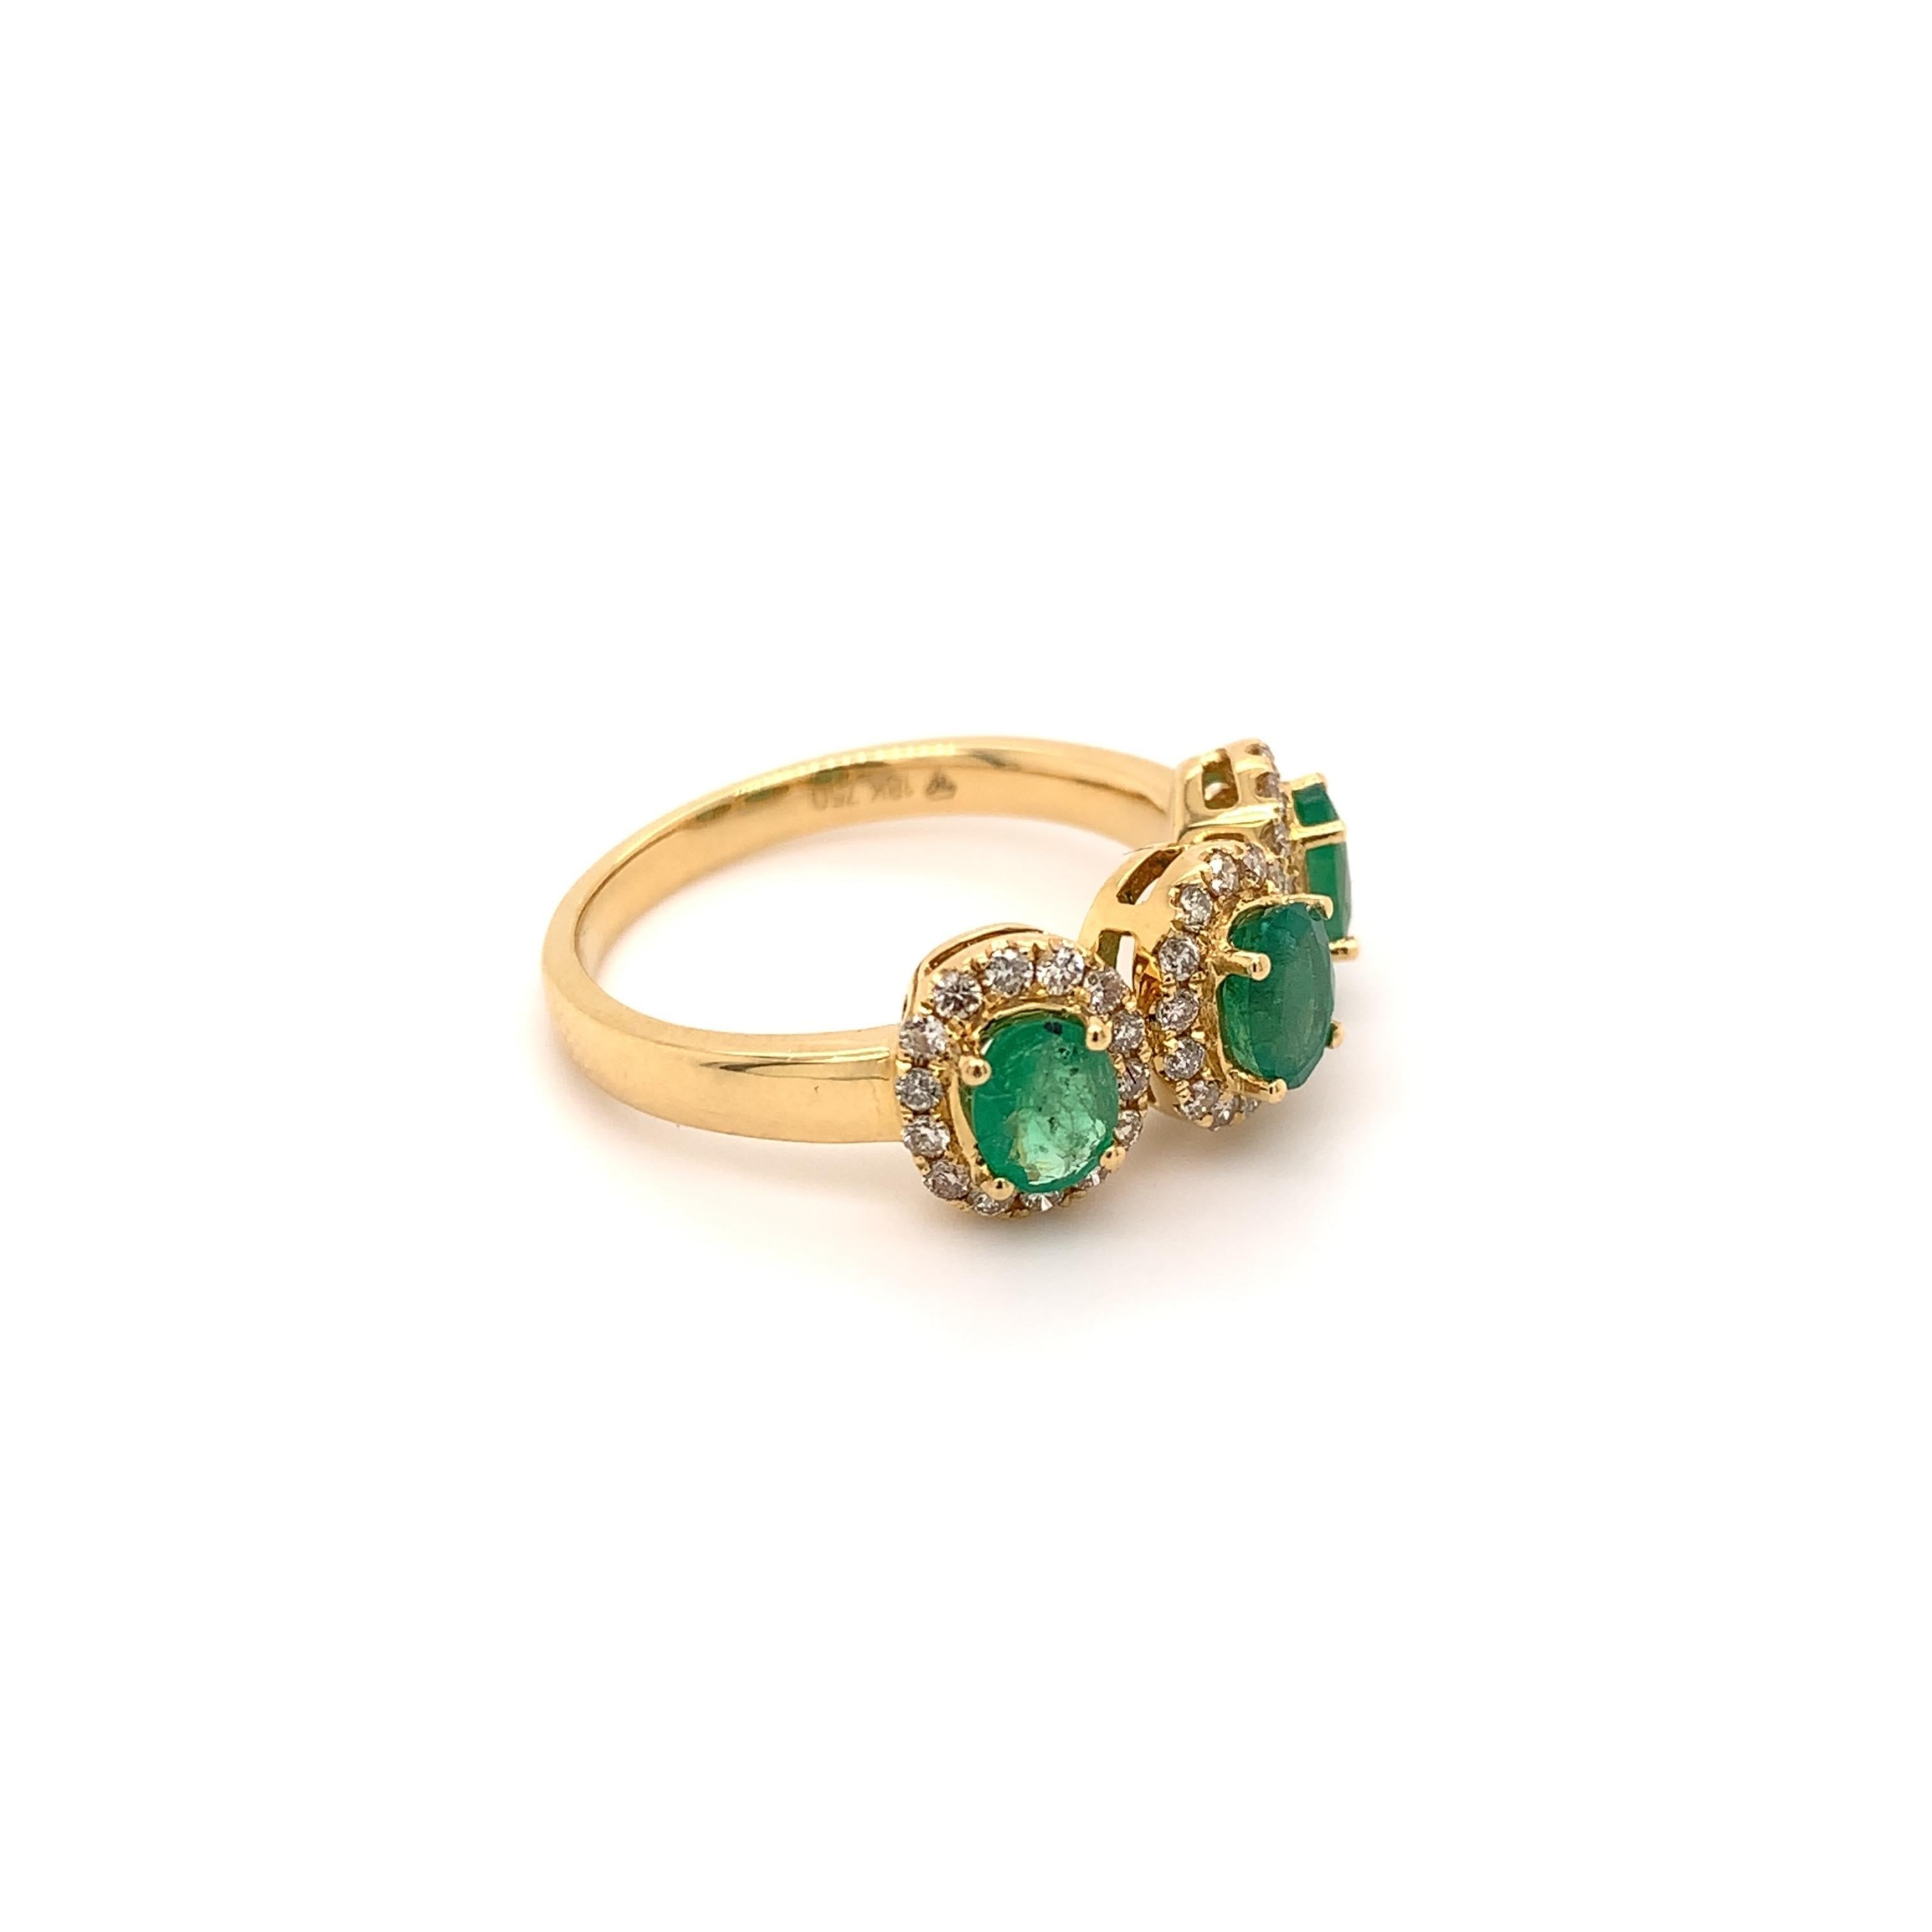 Trinity style emerald diamond ring. High brilliance, lively green, oval faceted 1.10 carats natural emeralds, mounted in high profile open basket with bead prongs, accented with round brilliant cut diamonds. Beautiful handcrafted design set in high